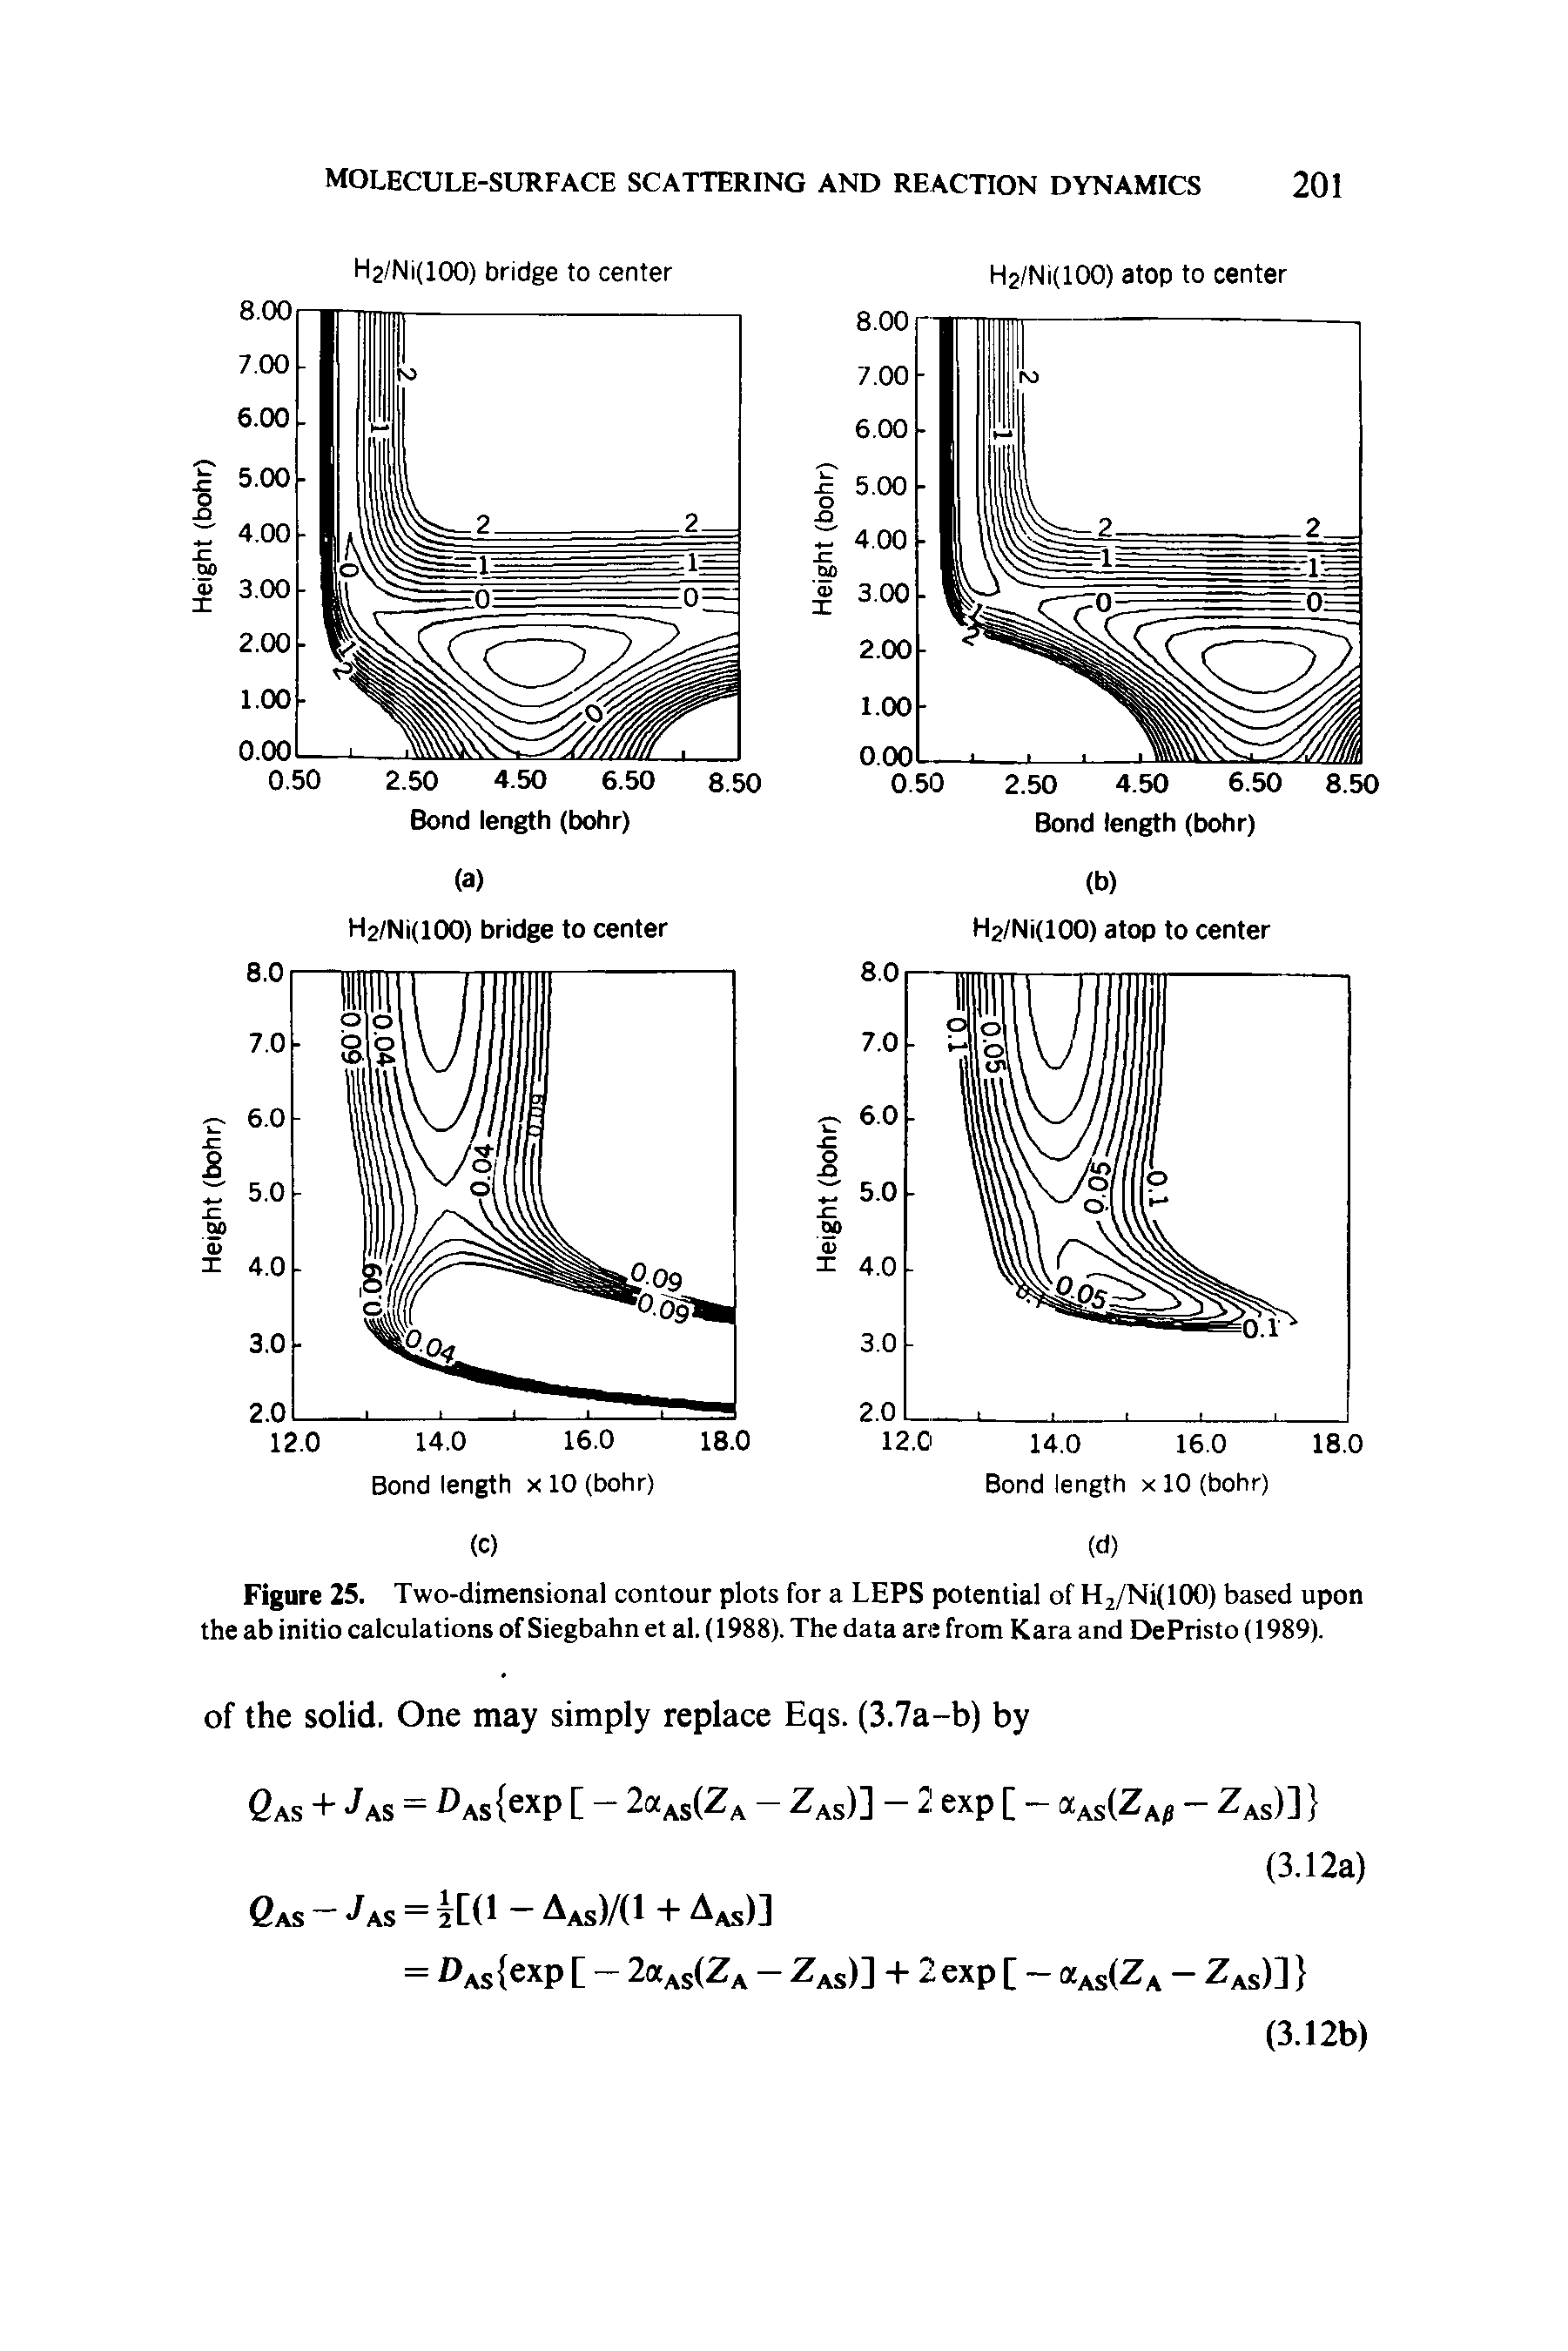 Figure 25. Two-dimensional contour plots for a LEPS potential of Hj/NiilOO) based upon the ab initio calculations of Siegbahnet al. (1988). The data are from Kara and DePristo (1989).